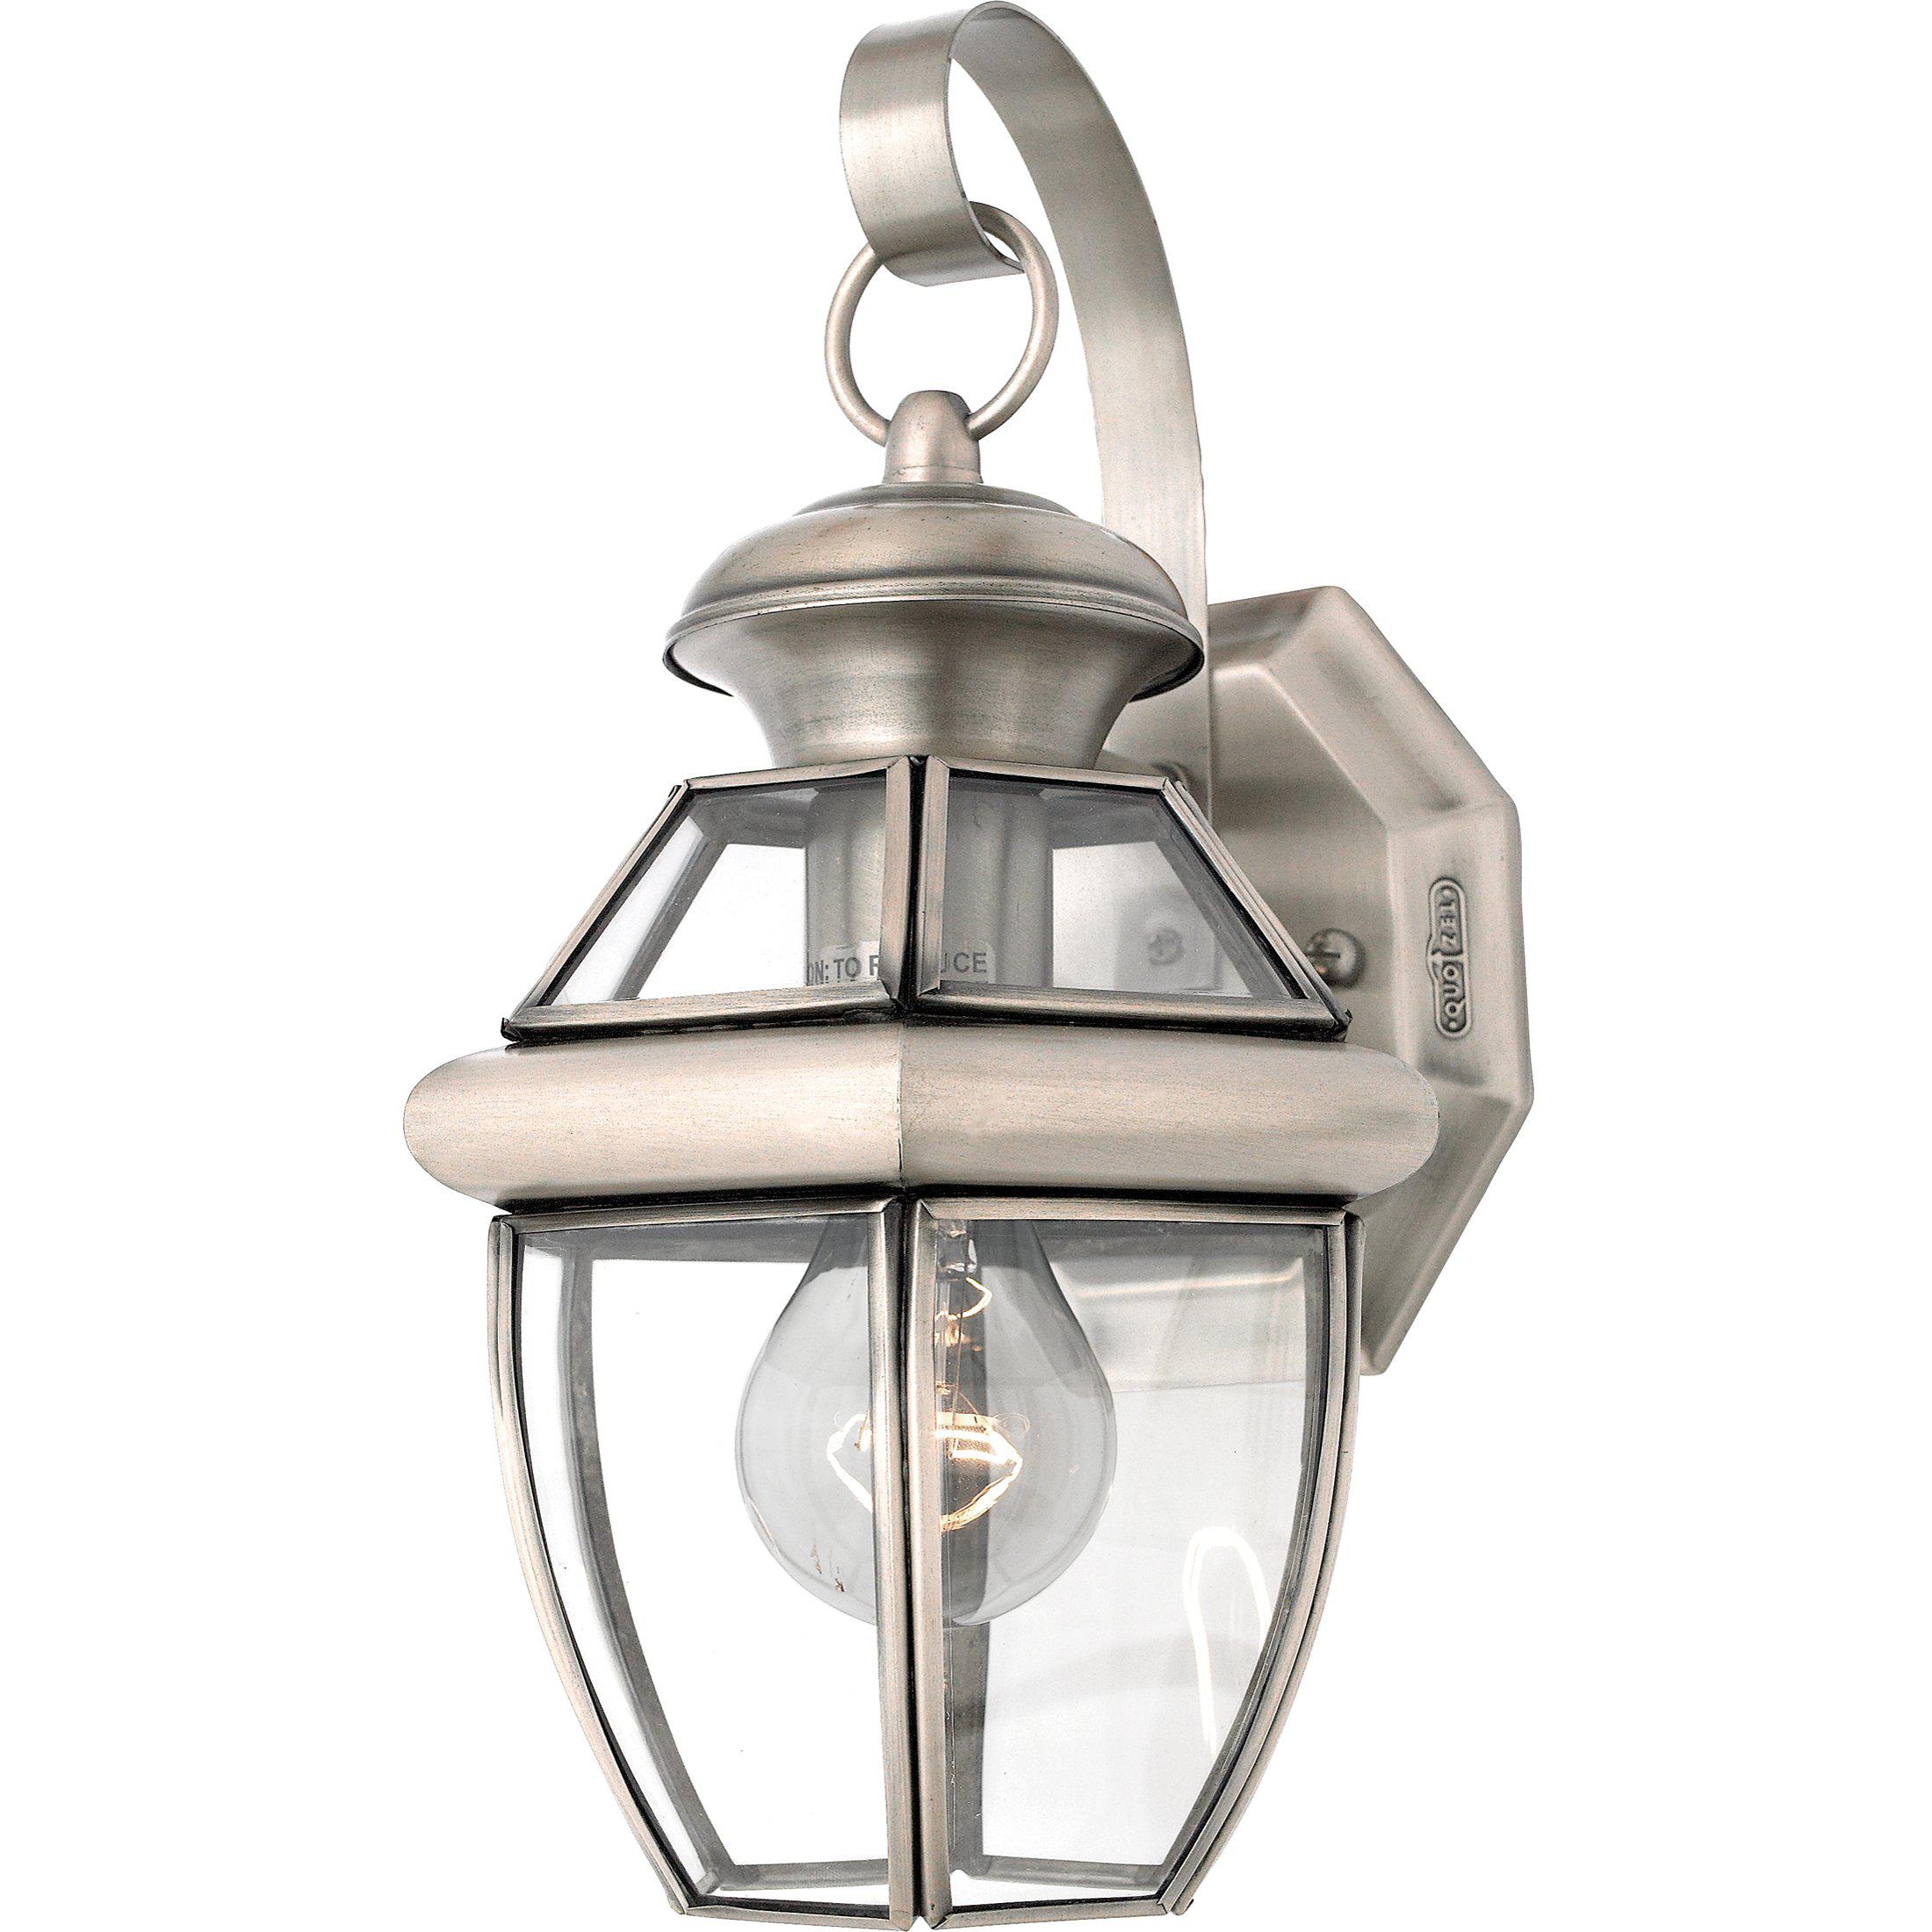 Quoizel  Newbury Outdoor Lantern, Small Outdoor l Wall Quoizel Pewter  